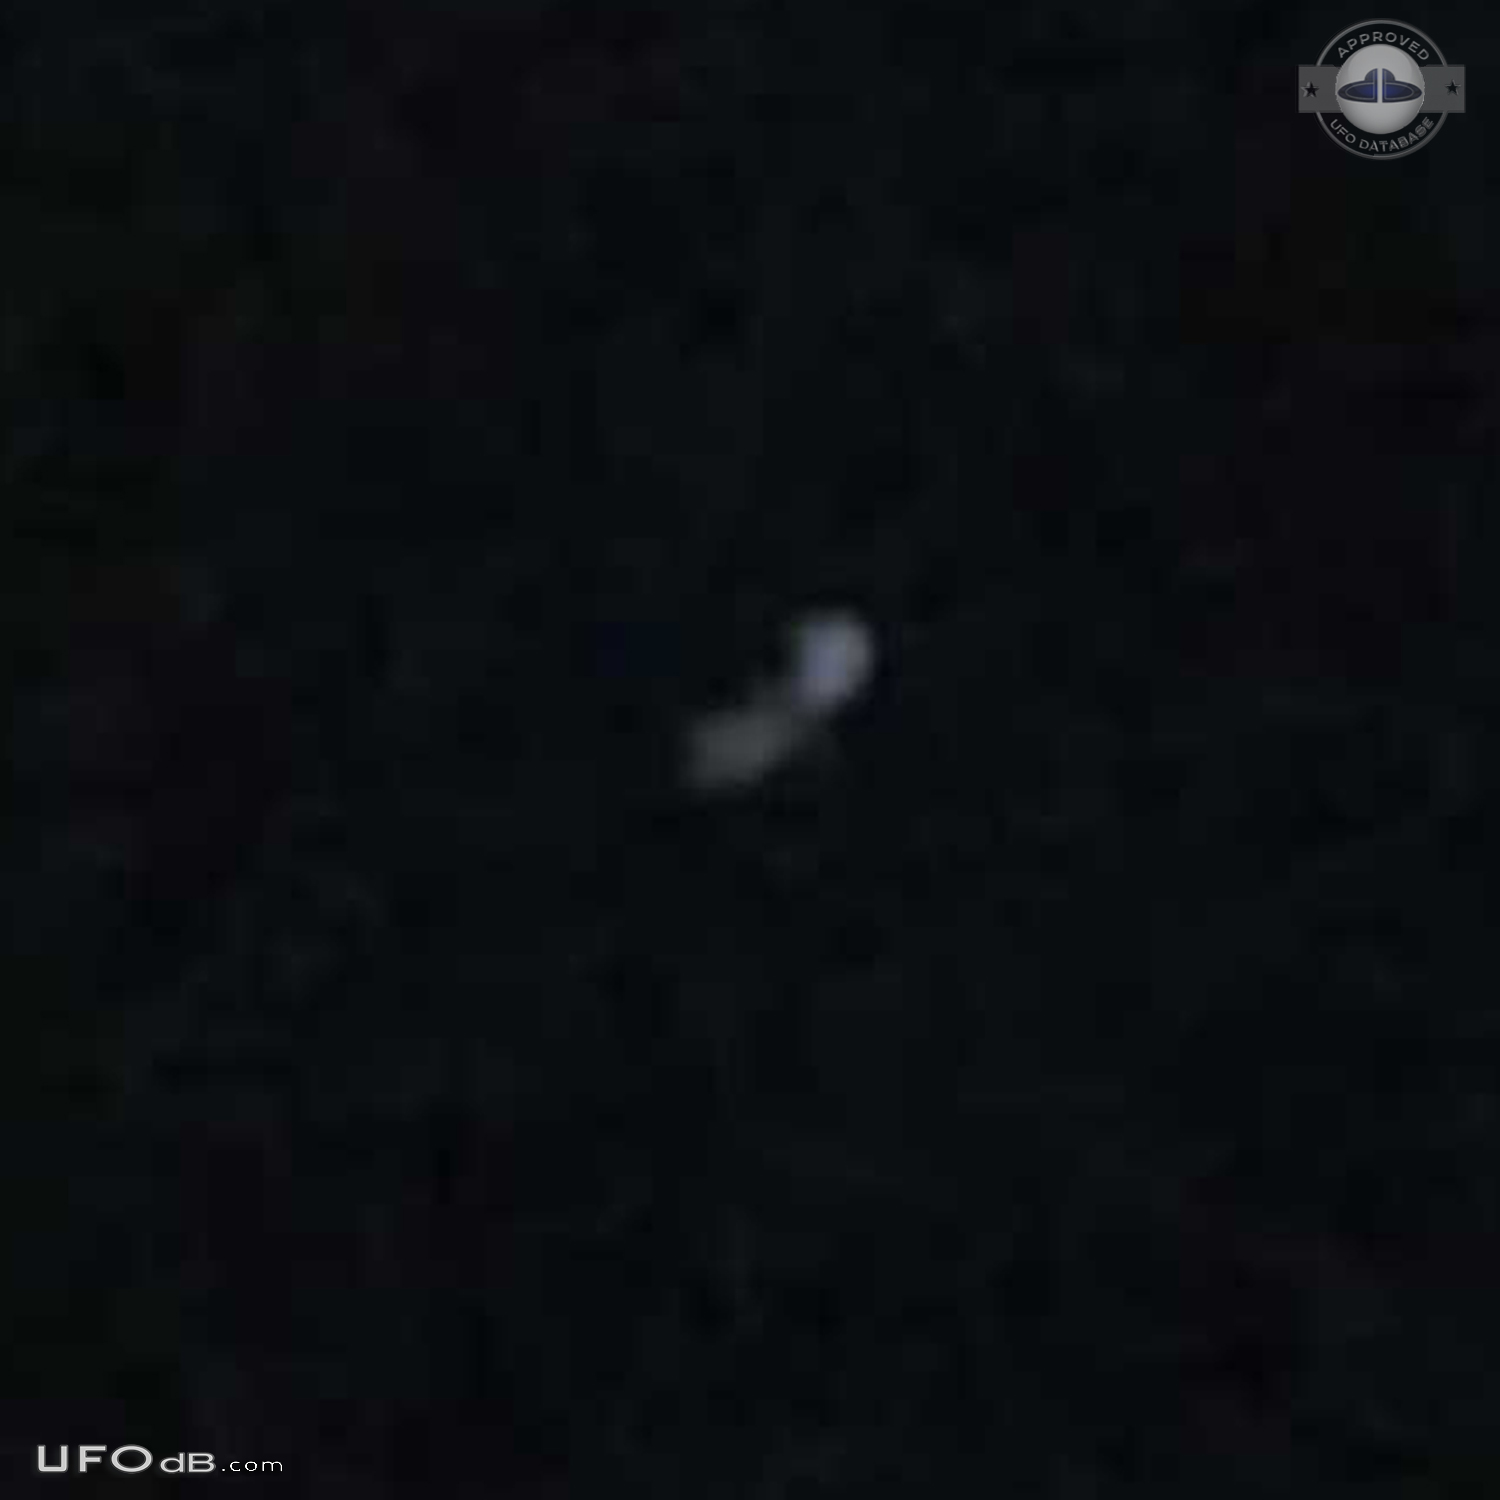 Multi week sightings of same UFO over multiple hours each night - Flor UFO Picture #775-3